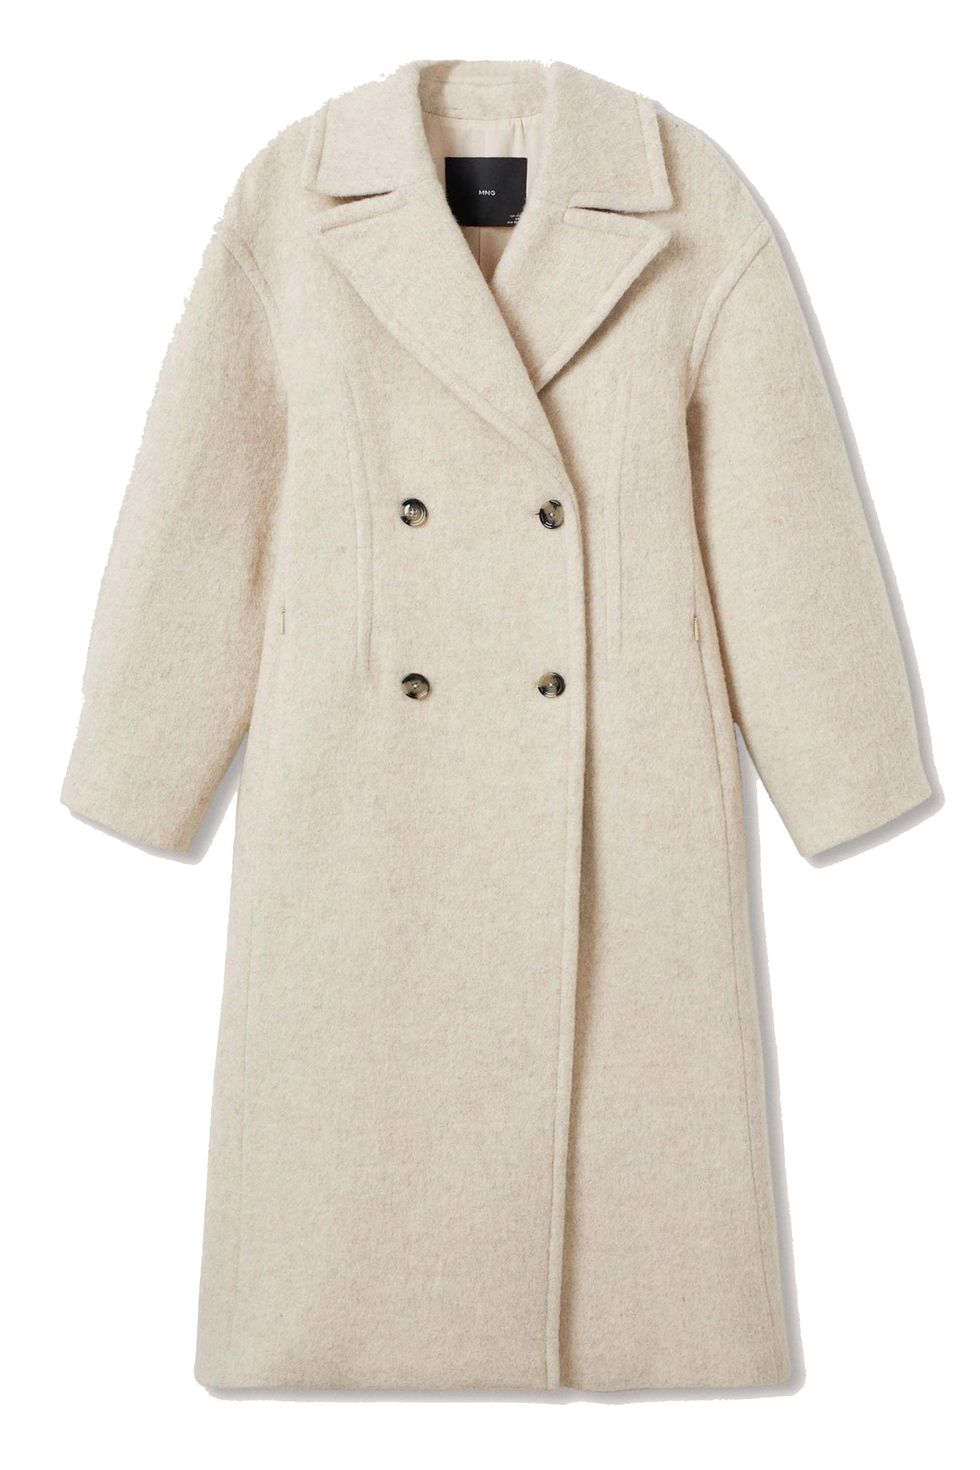 This celebrity-approved Mango coat has a 500-person waitlist